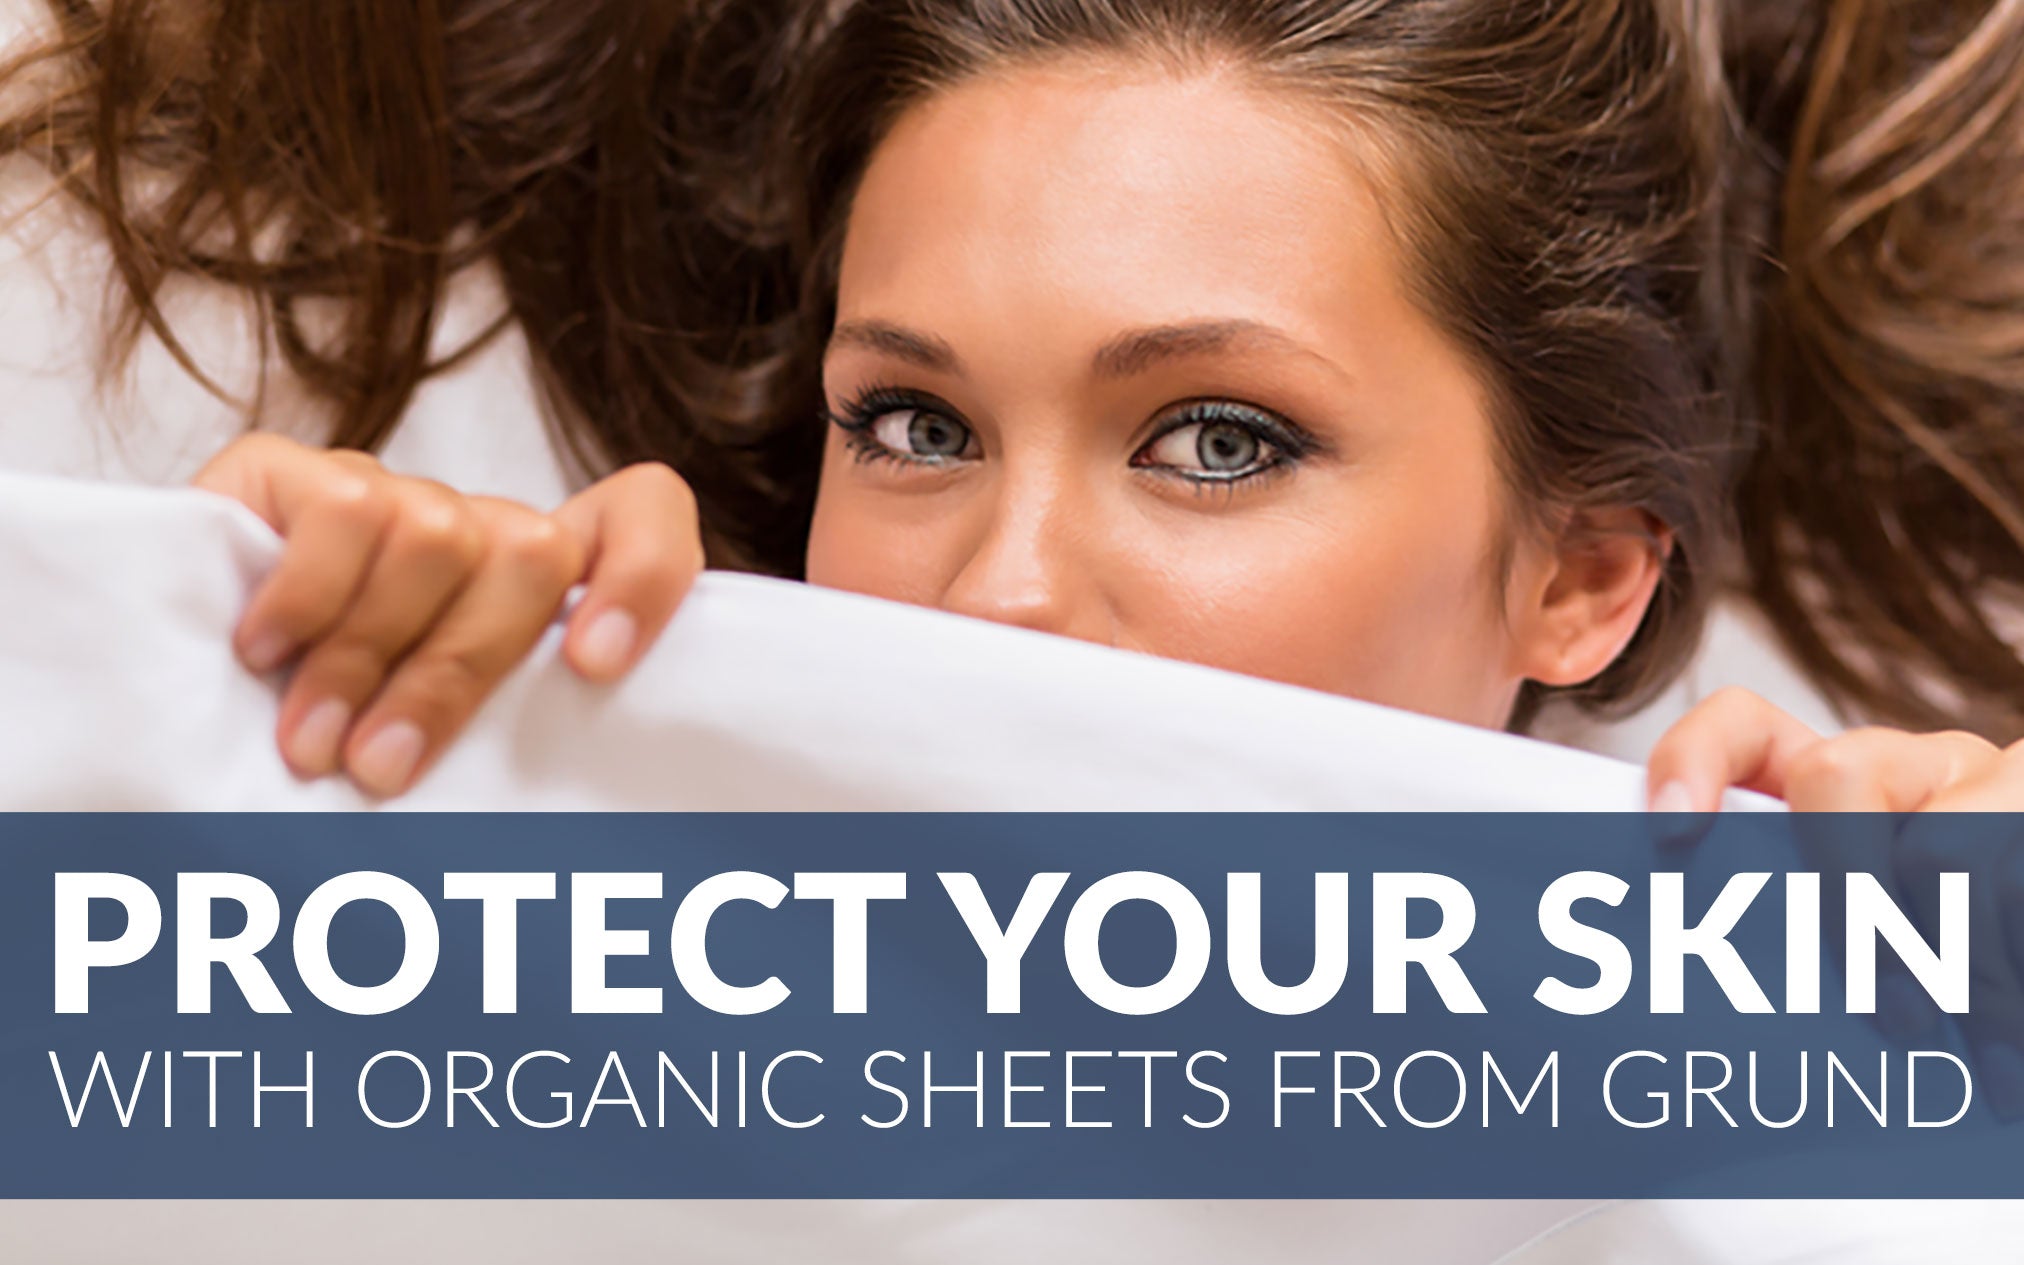 Protect Your Skin With Organic Sheets